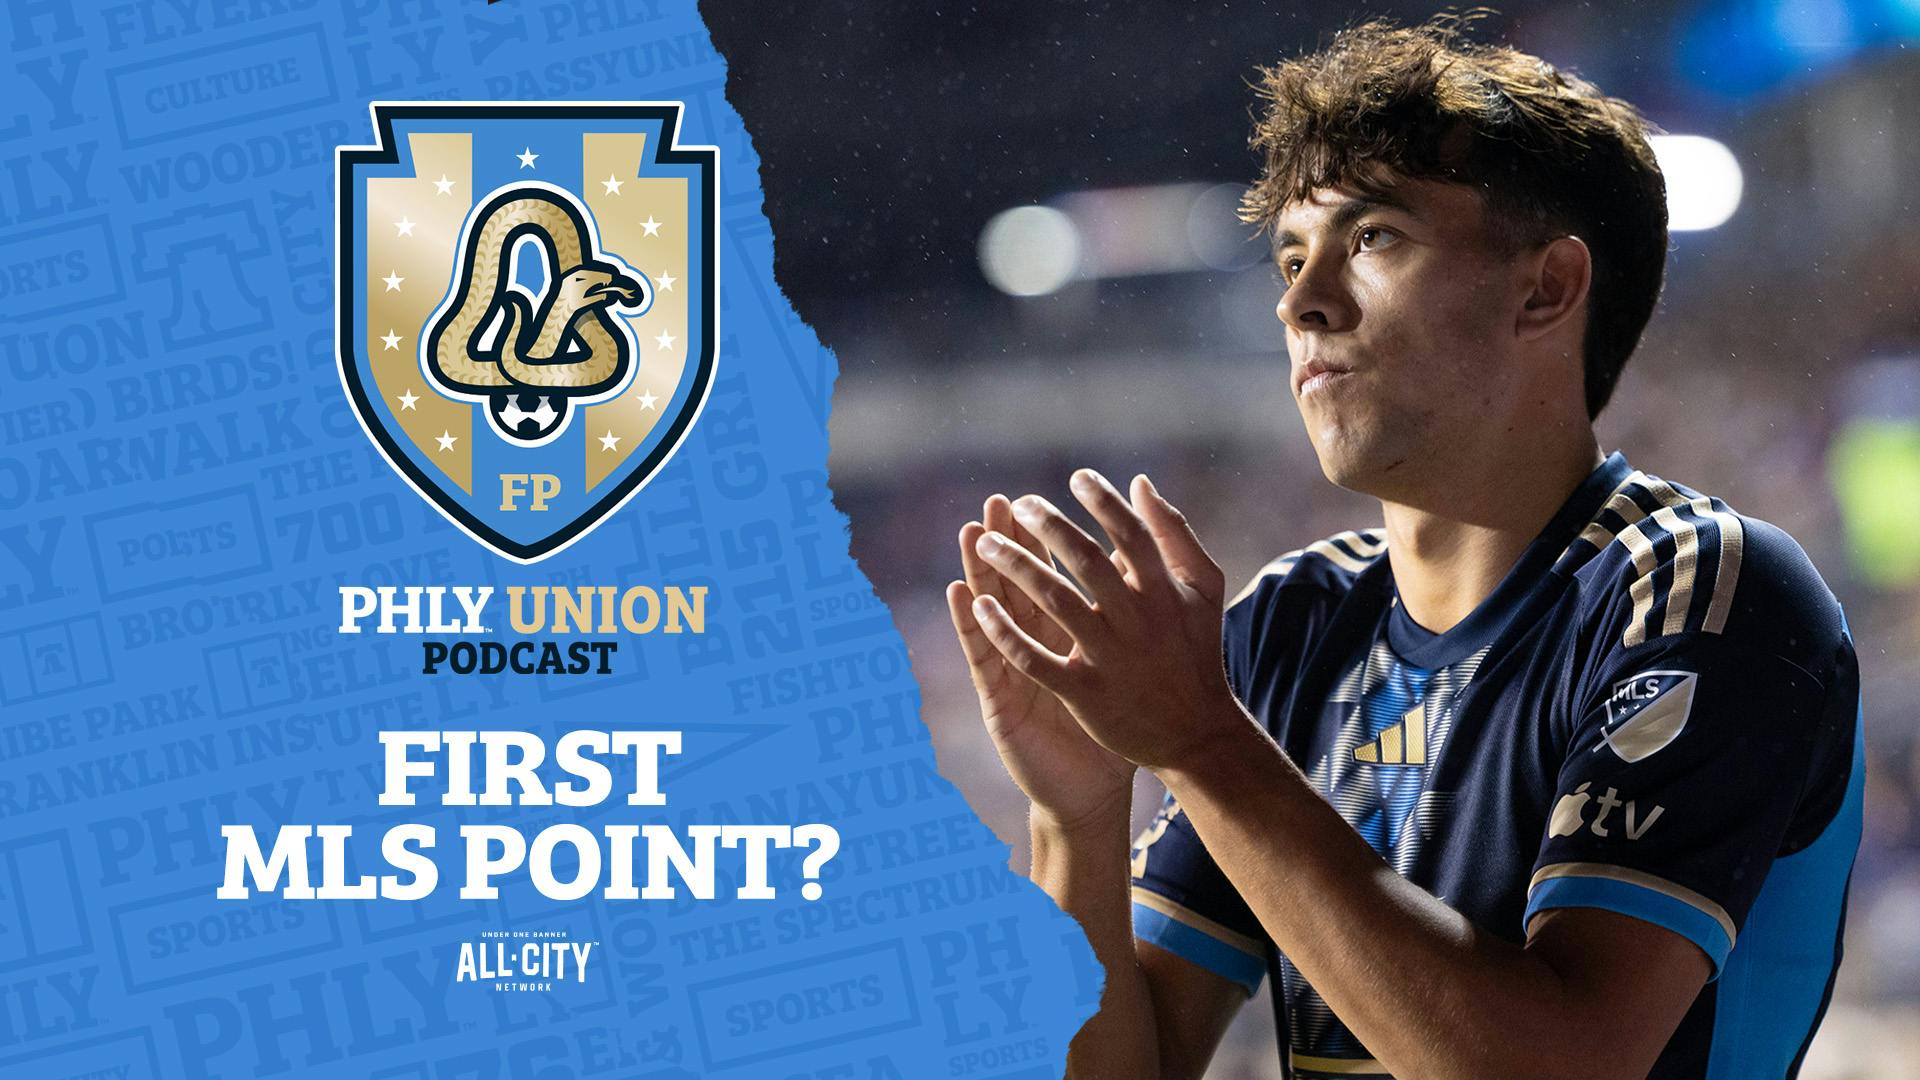 PHLY Union Podcast | Will Quinn Sullivan, the Philadelphia Union get their 1st MLS win Saturday? Previewing Seattle